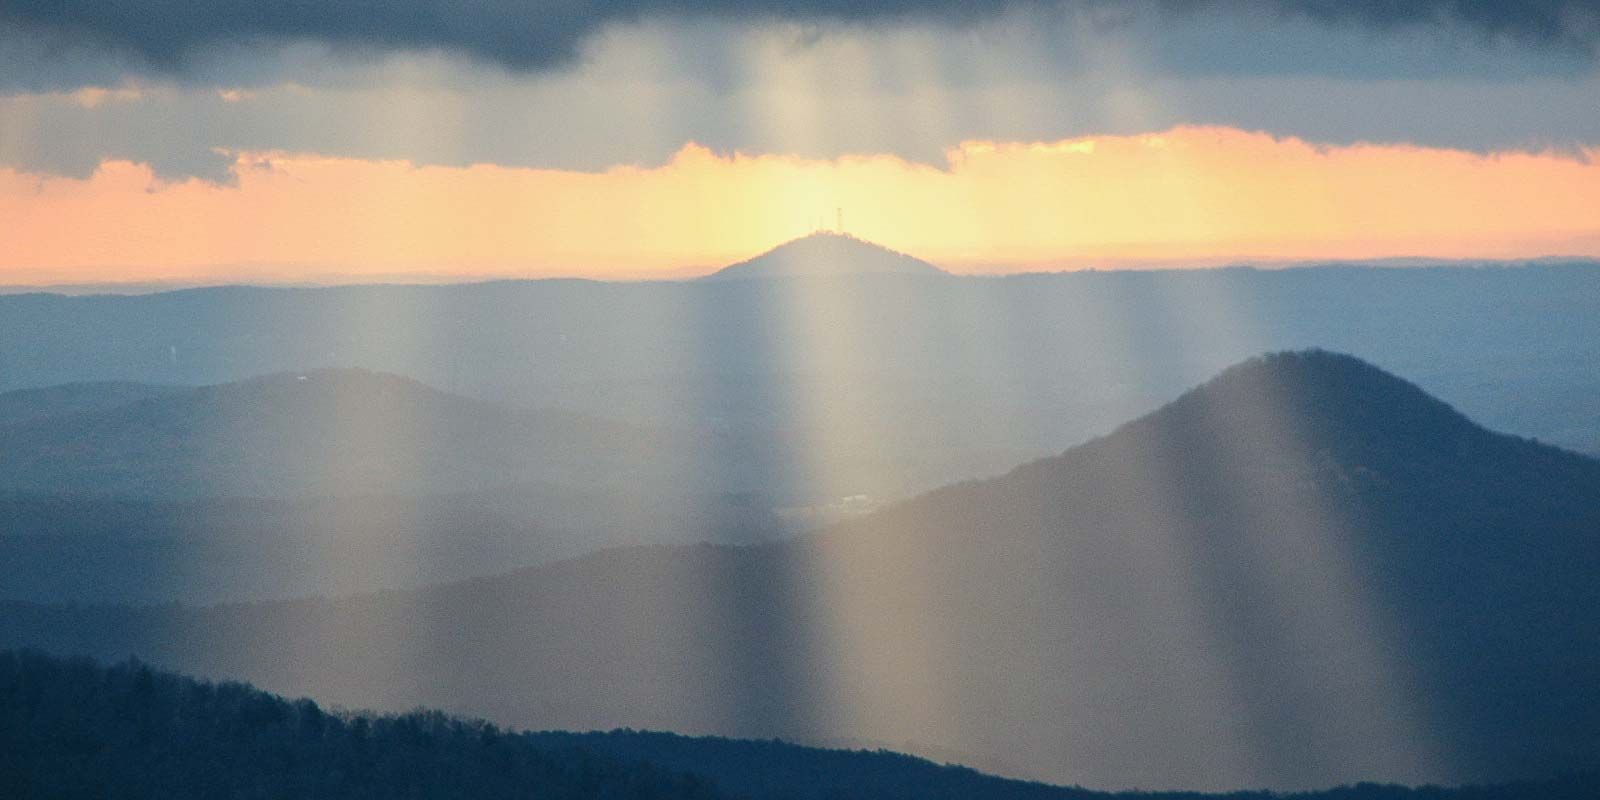 The sun is shining through the clouds over the mountains.